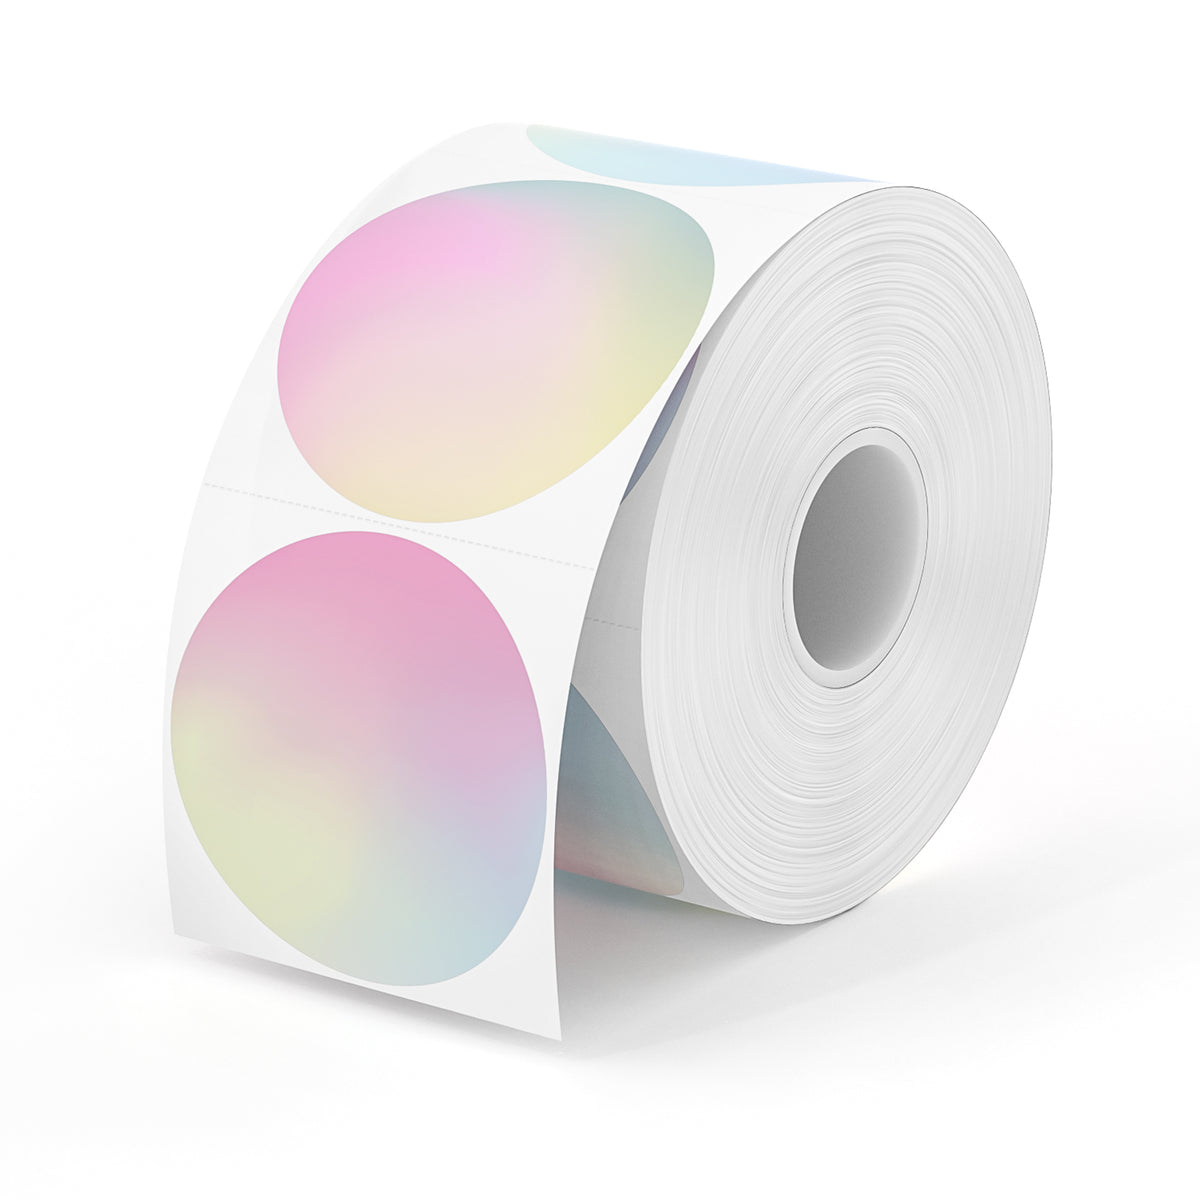 MUNBYN gradient color circle labels have six different gradient hues in a roll.